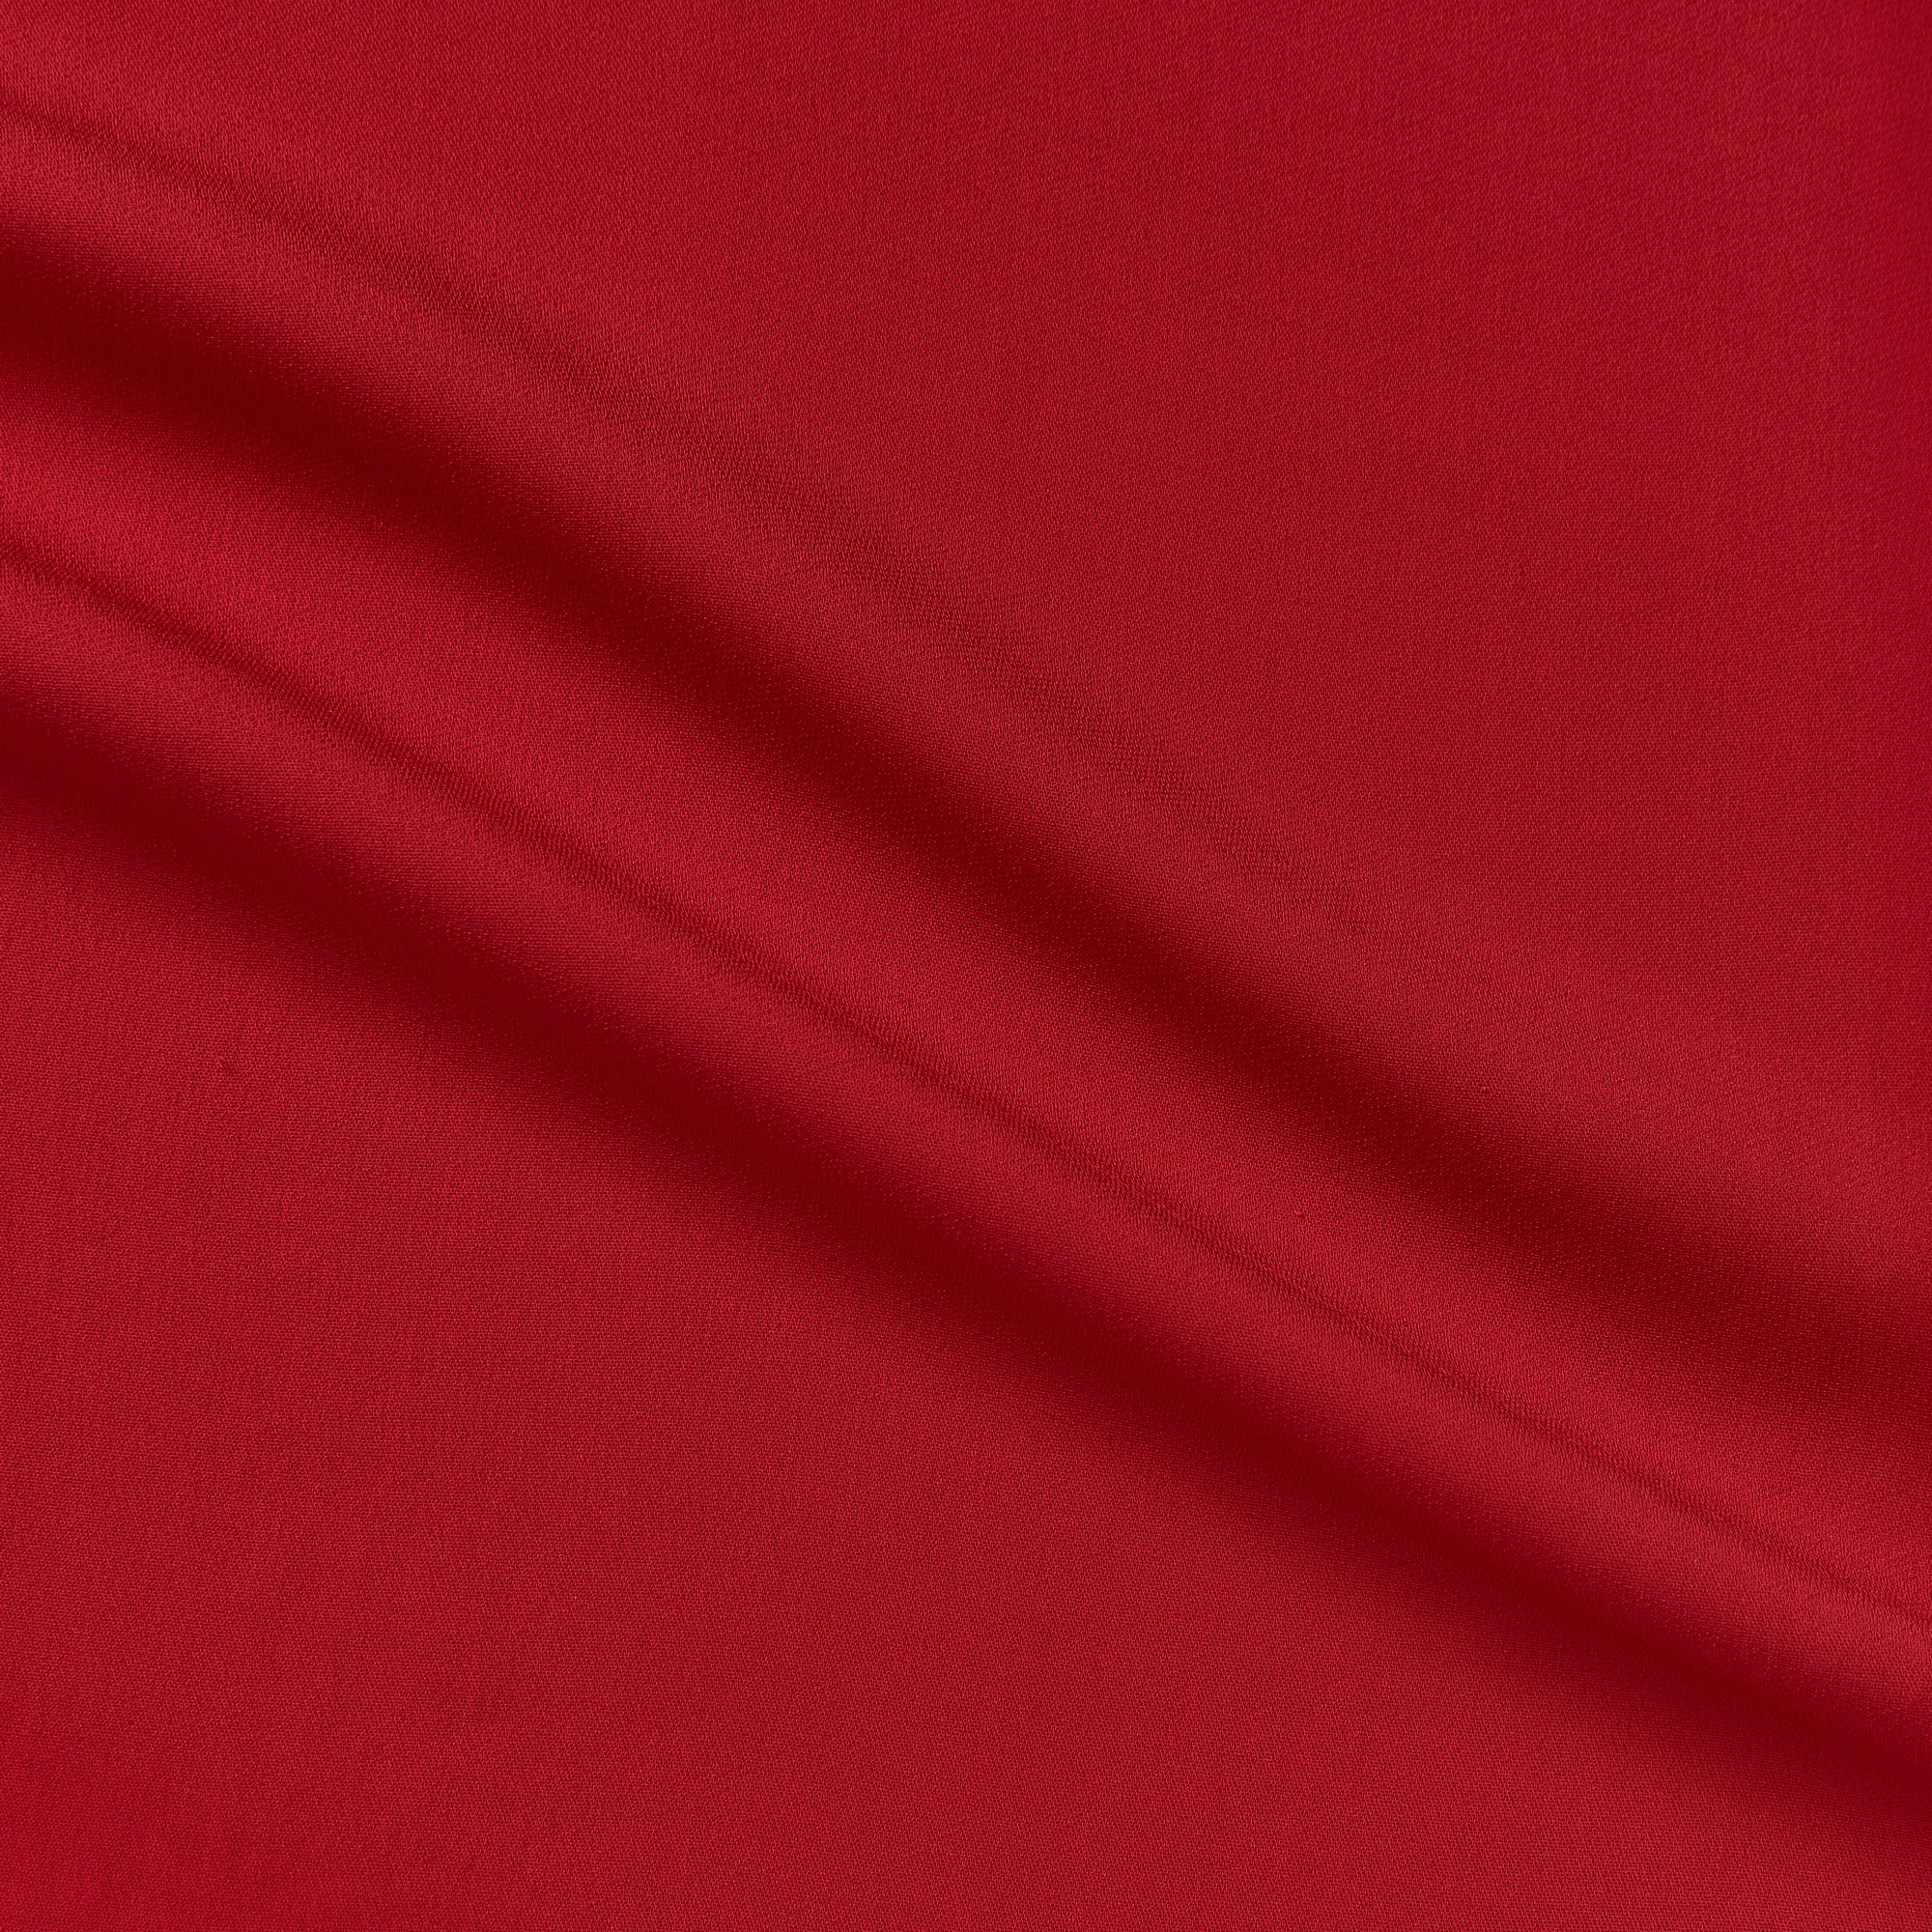 imagine illustrating the red color version of a stretch mid weight viscose and lycra with a natural silk like sheen and good drape